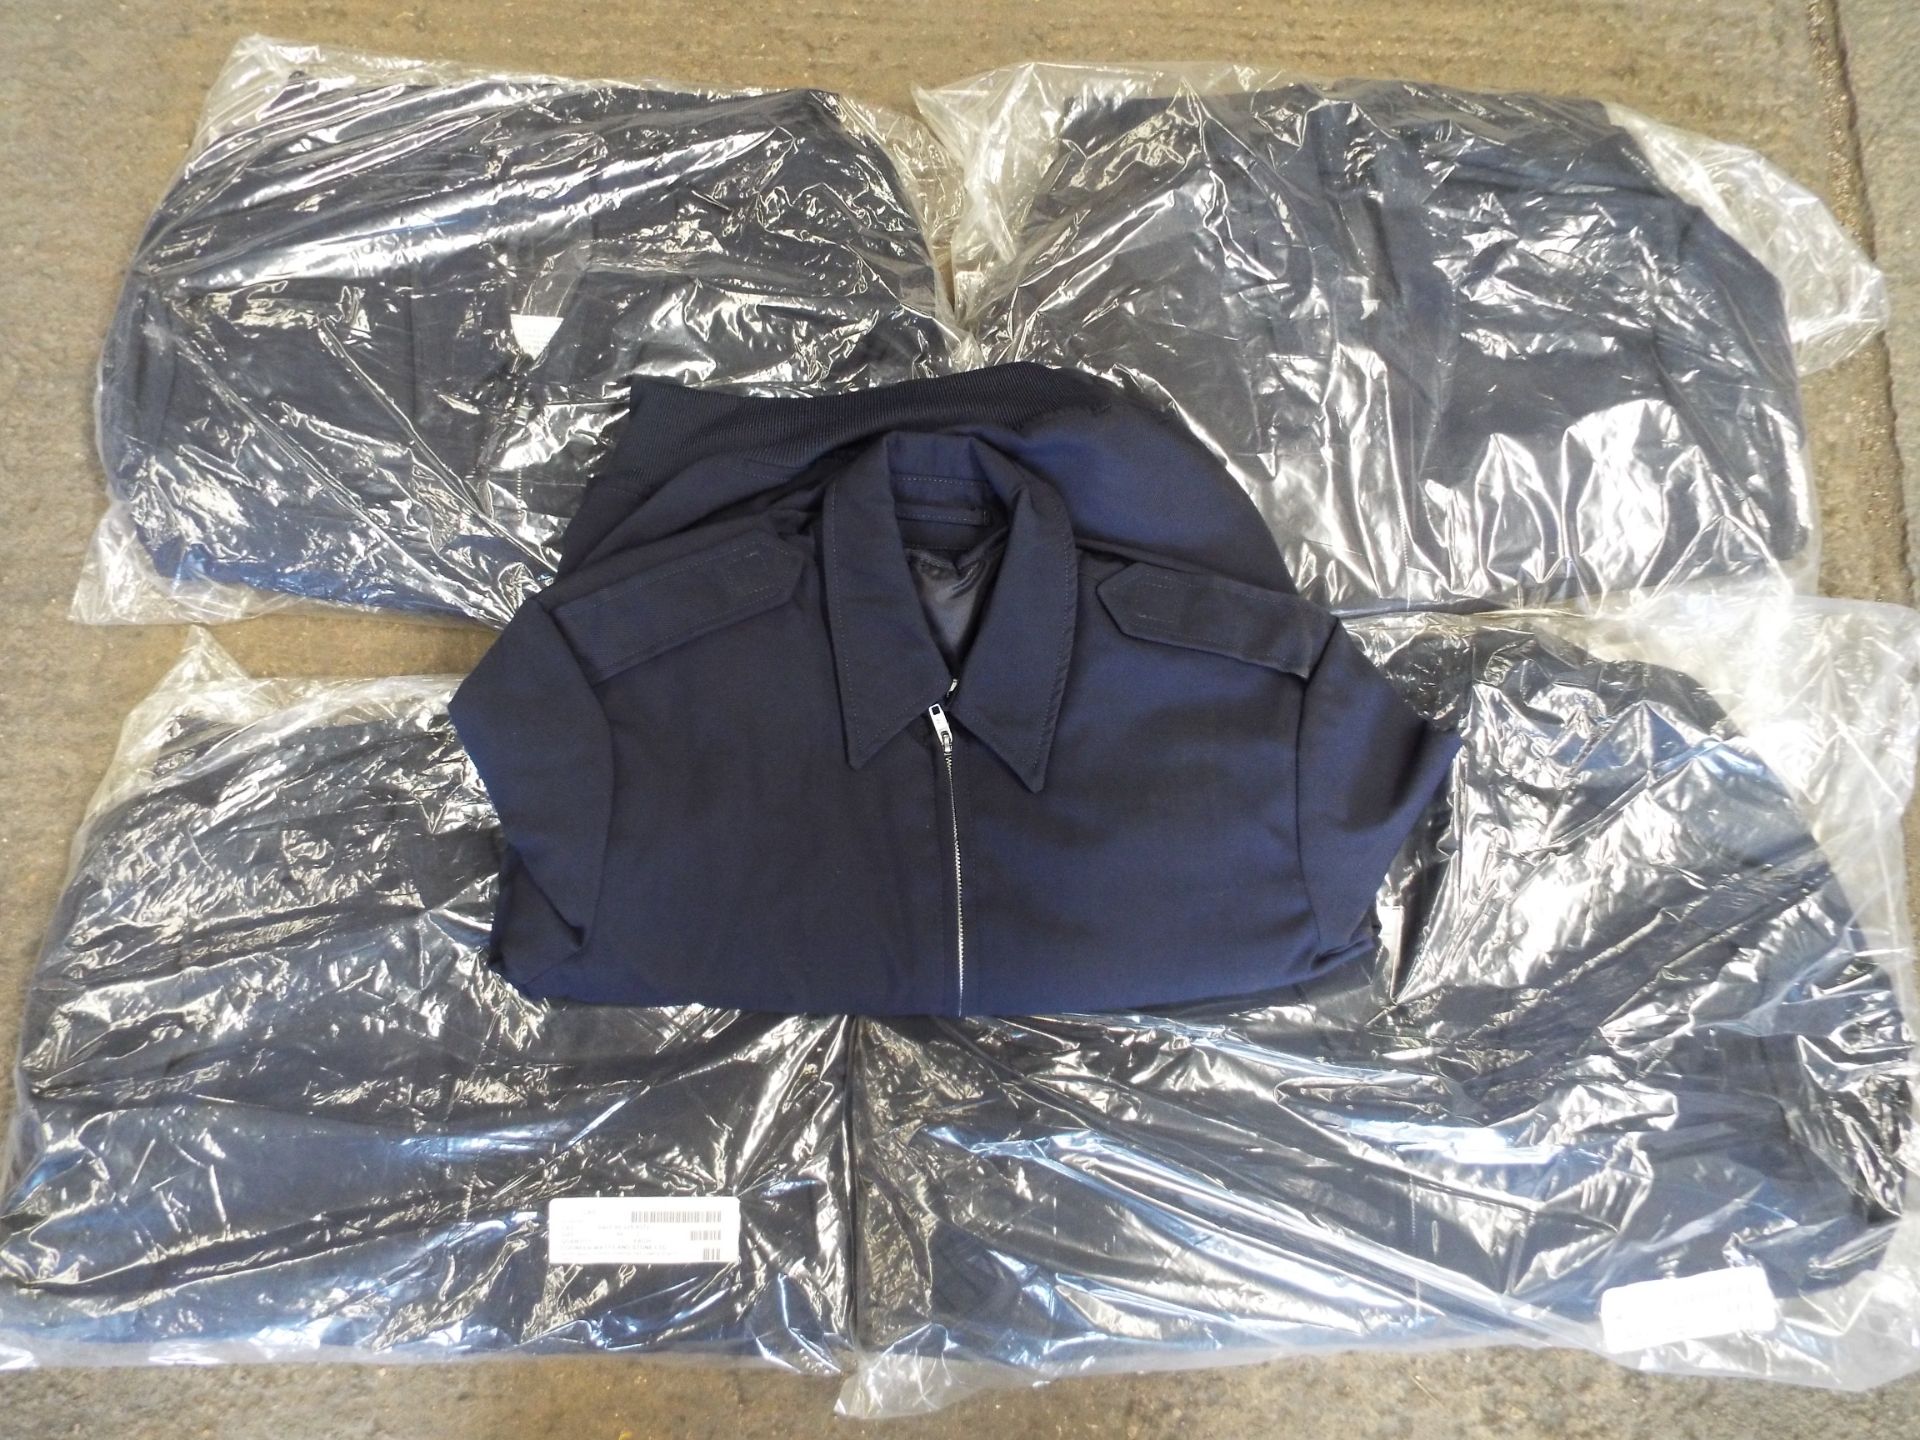 4 x RAF Bomber Jacket with Removable Liner - Image 4 of 4